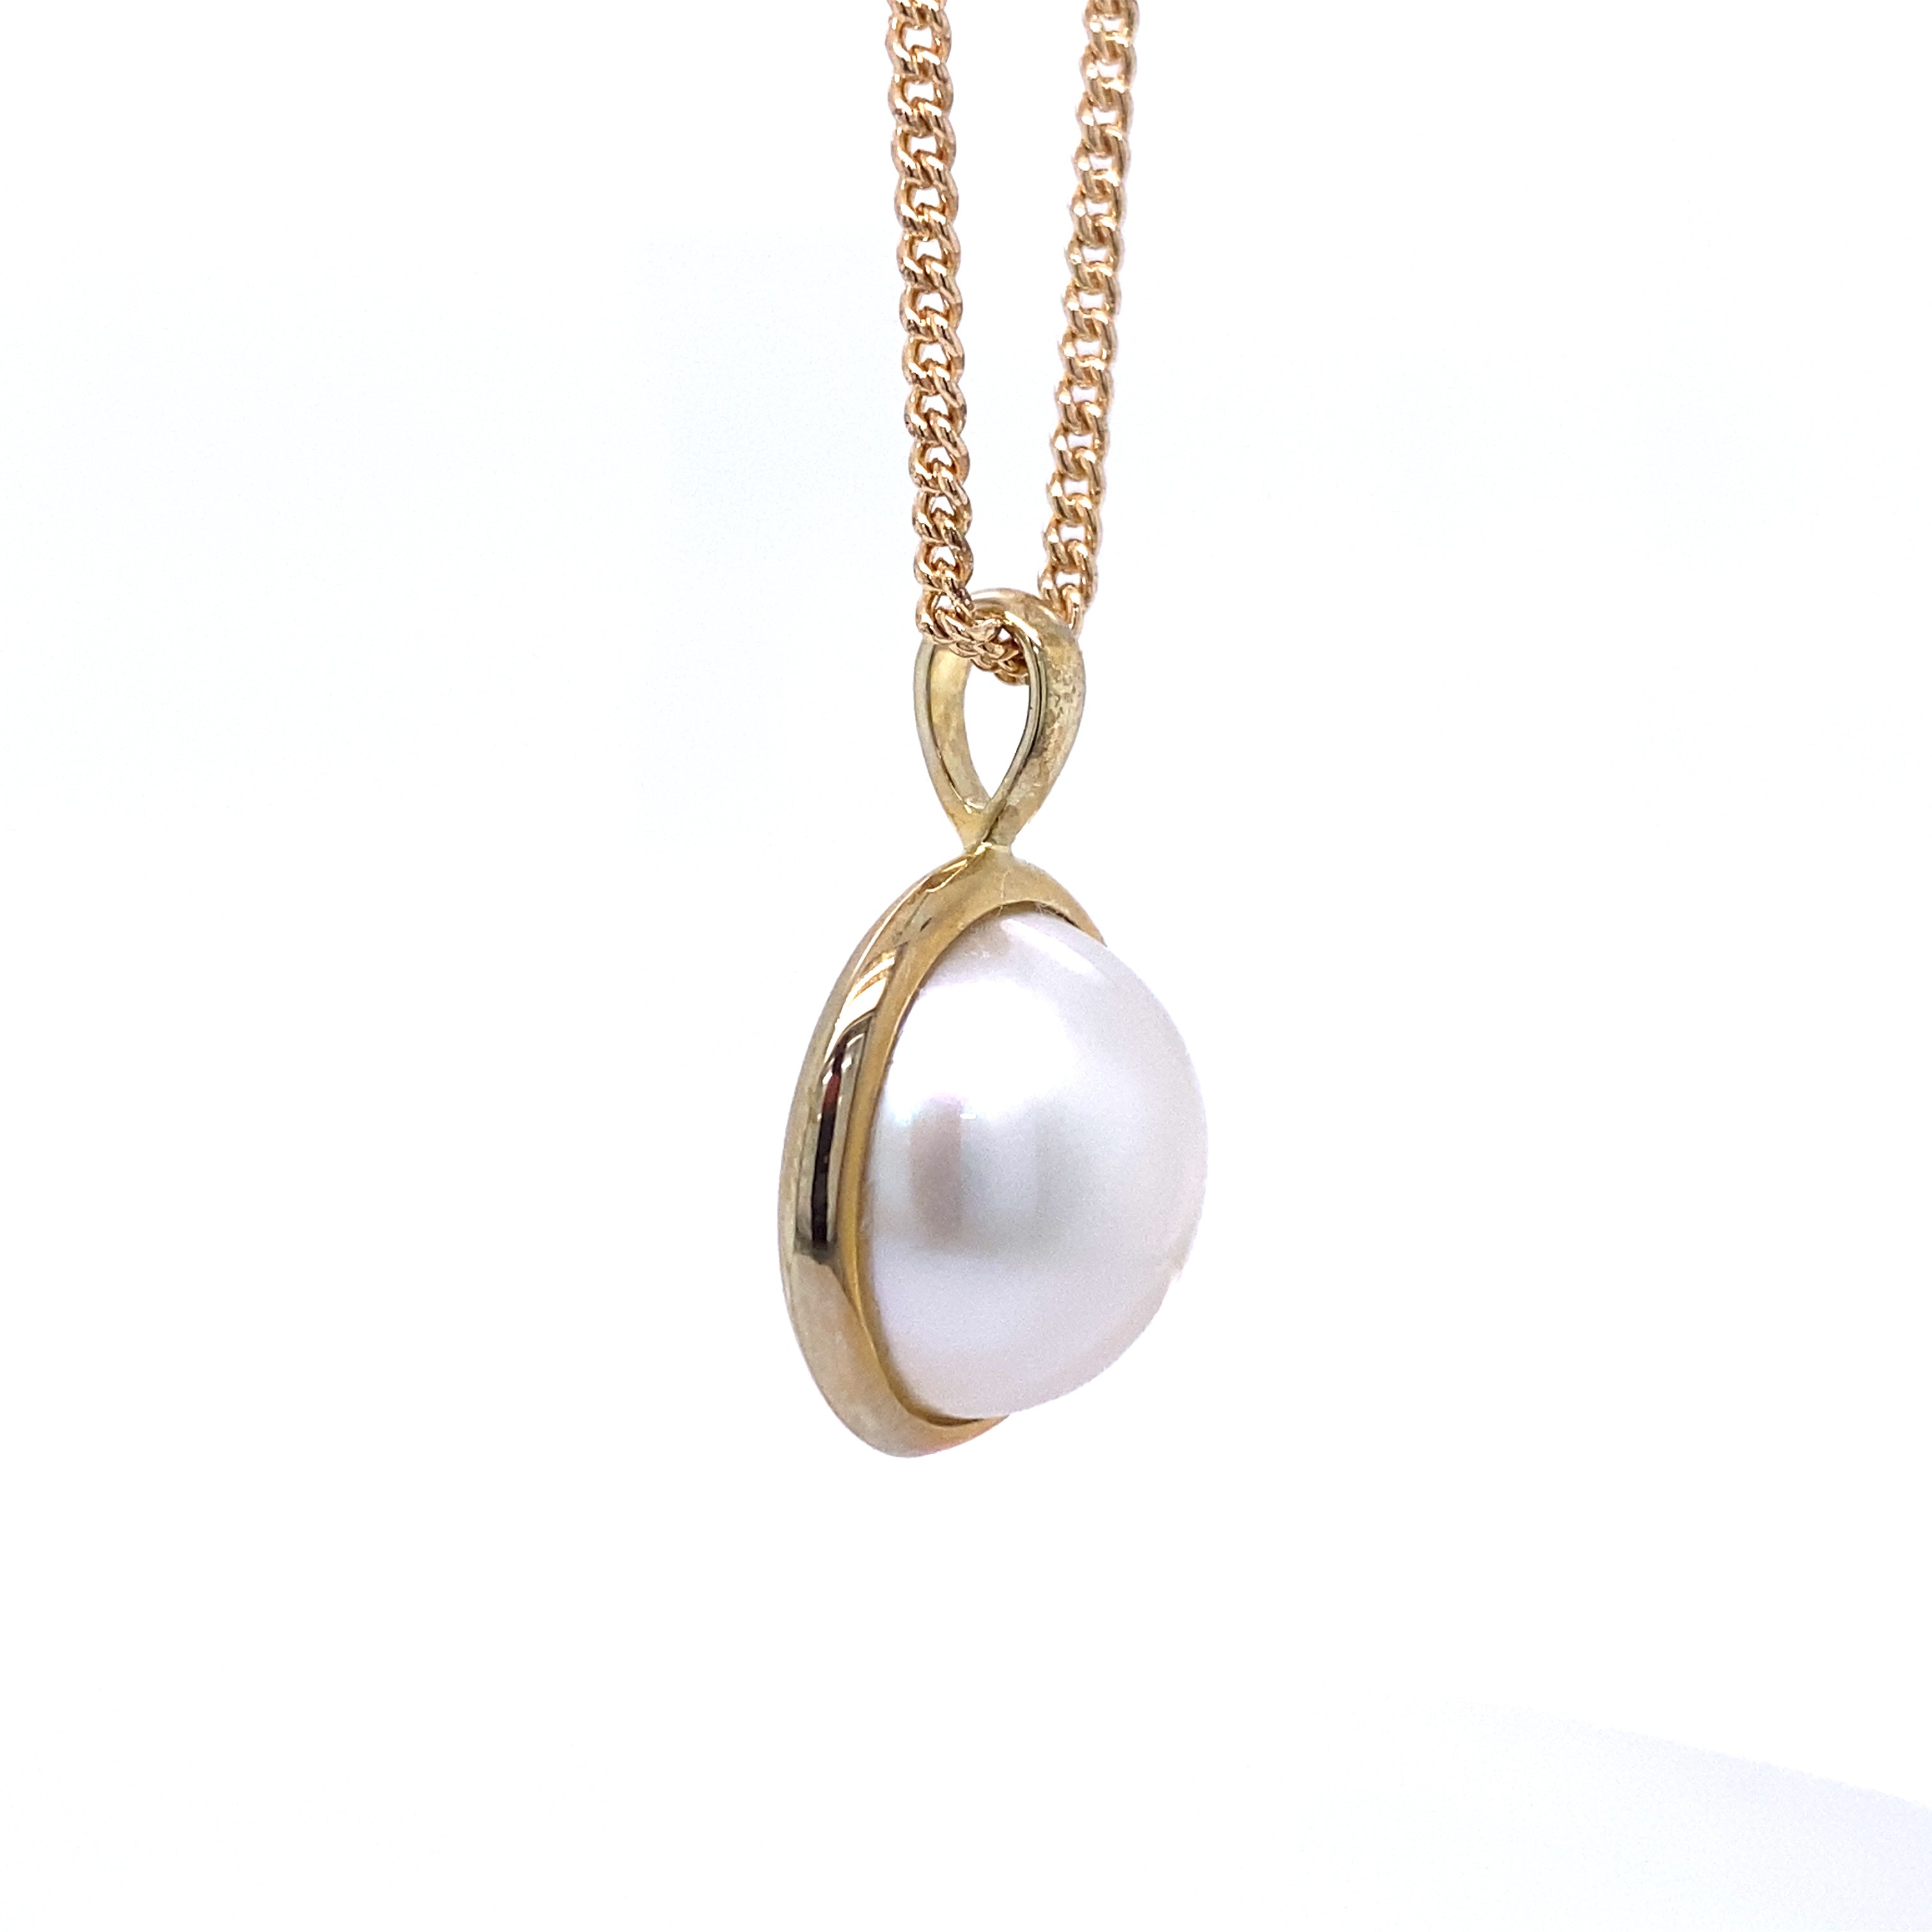 9ct yellow gold mabe pearl pendant.